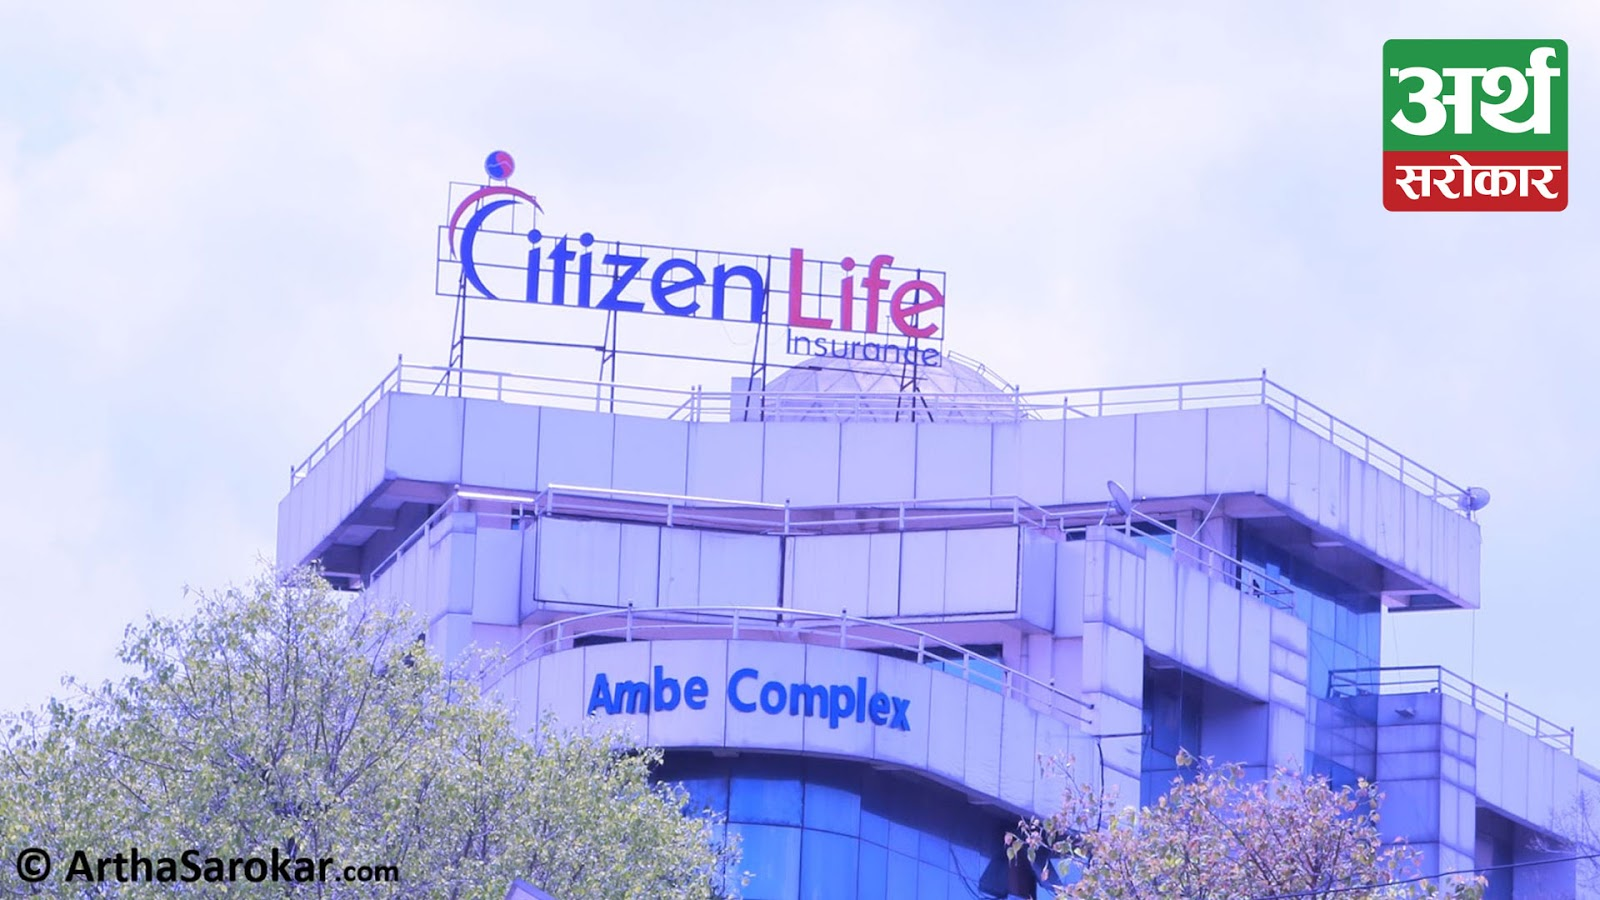 Citizen Life Insurance’s third annual general meeting on February 14, the proposal to issue IPO will be passed